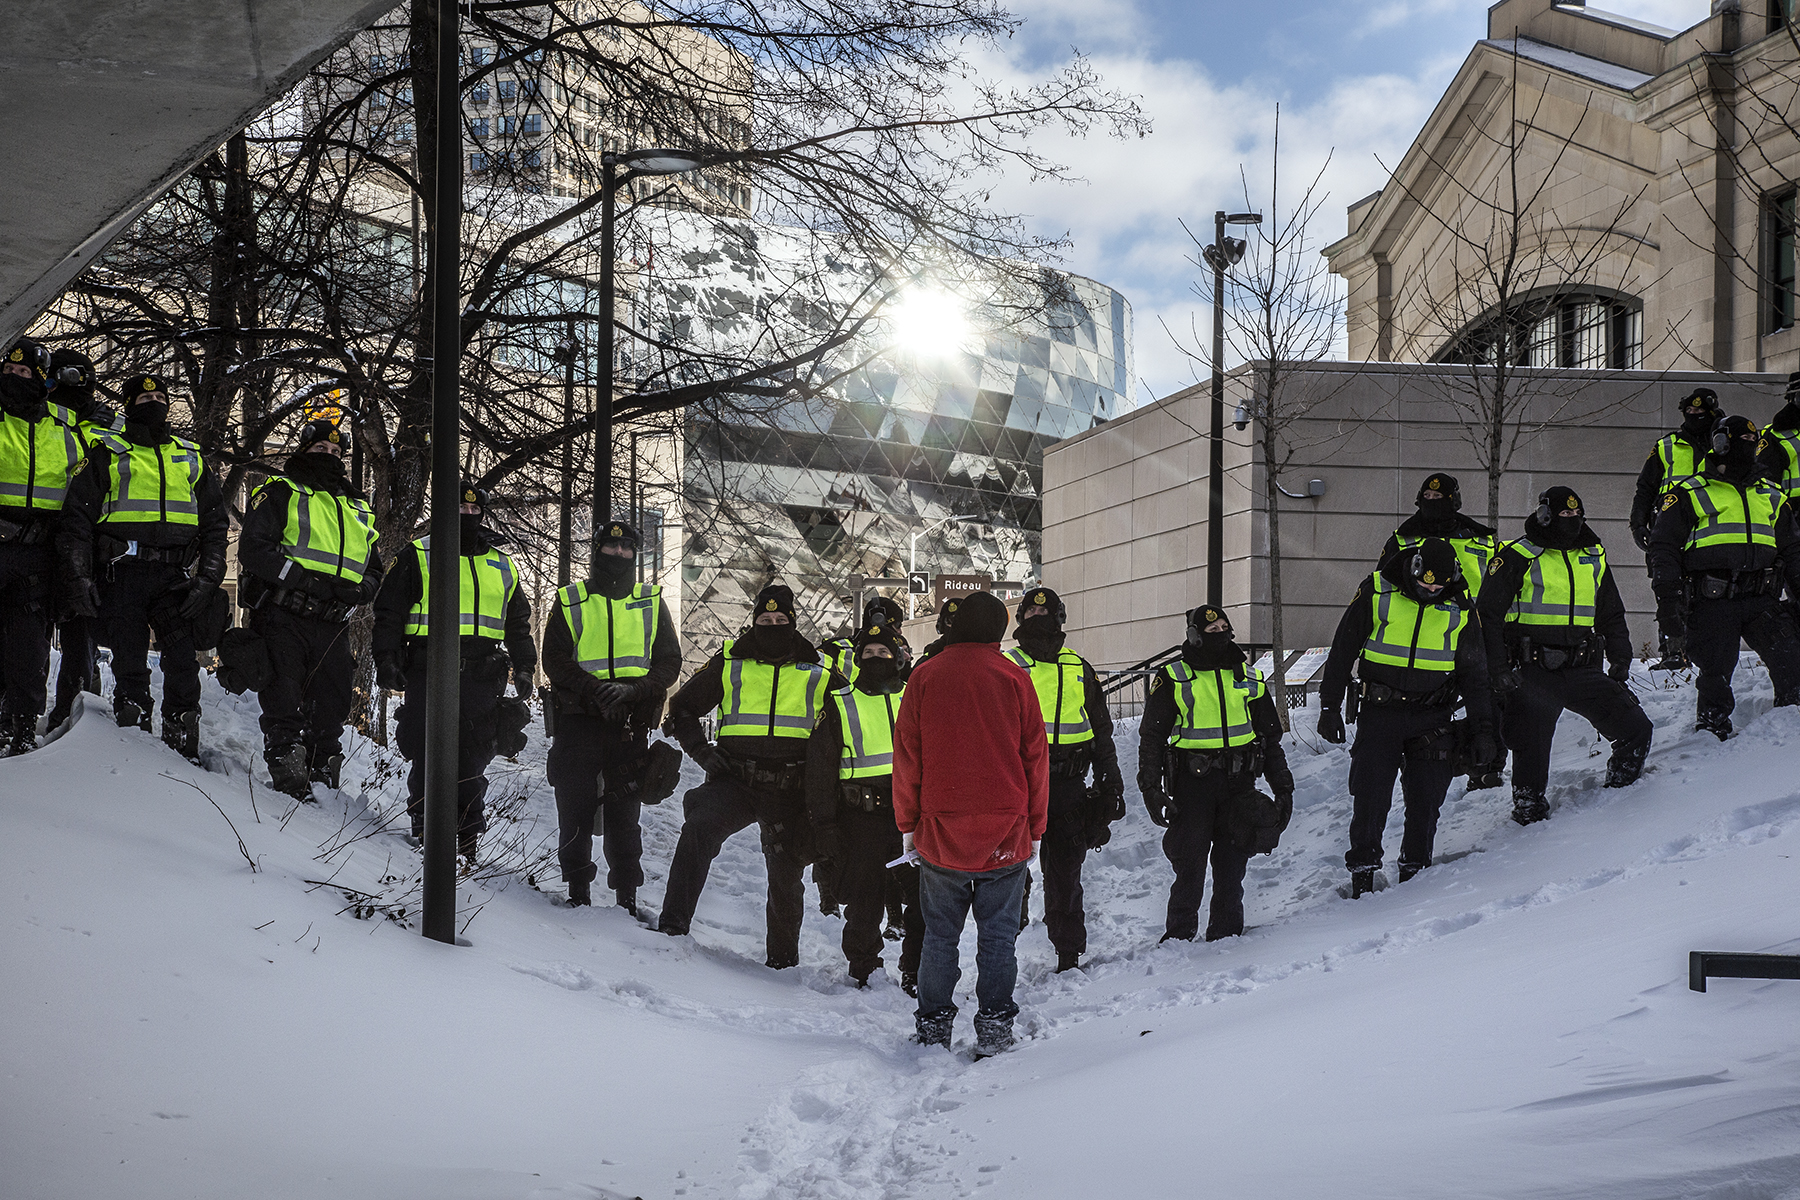 A protester in a read coat stands before a line of police in neon vests in Ottawa